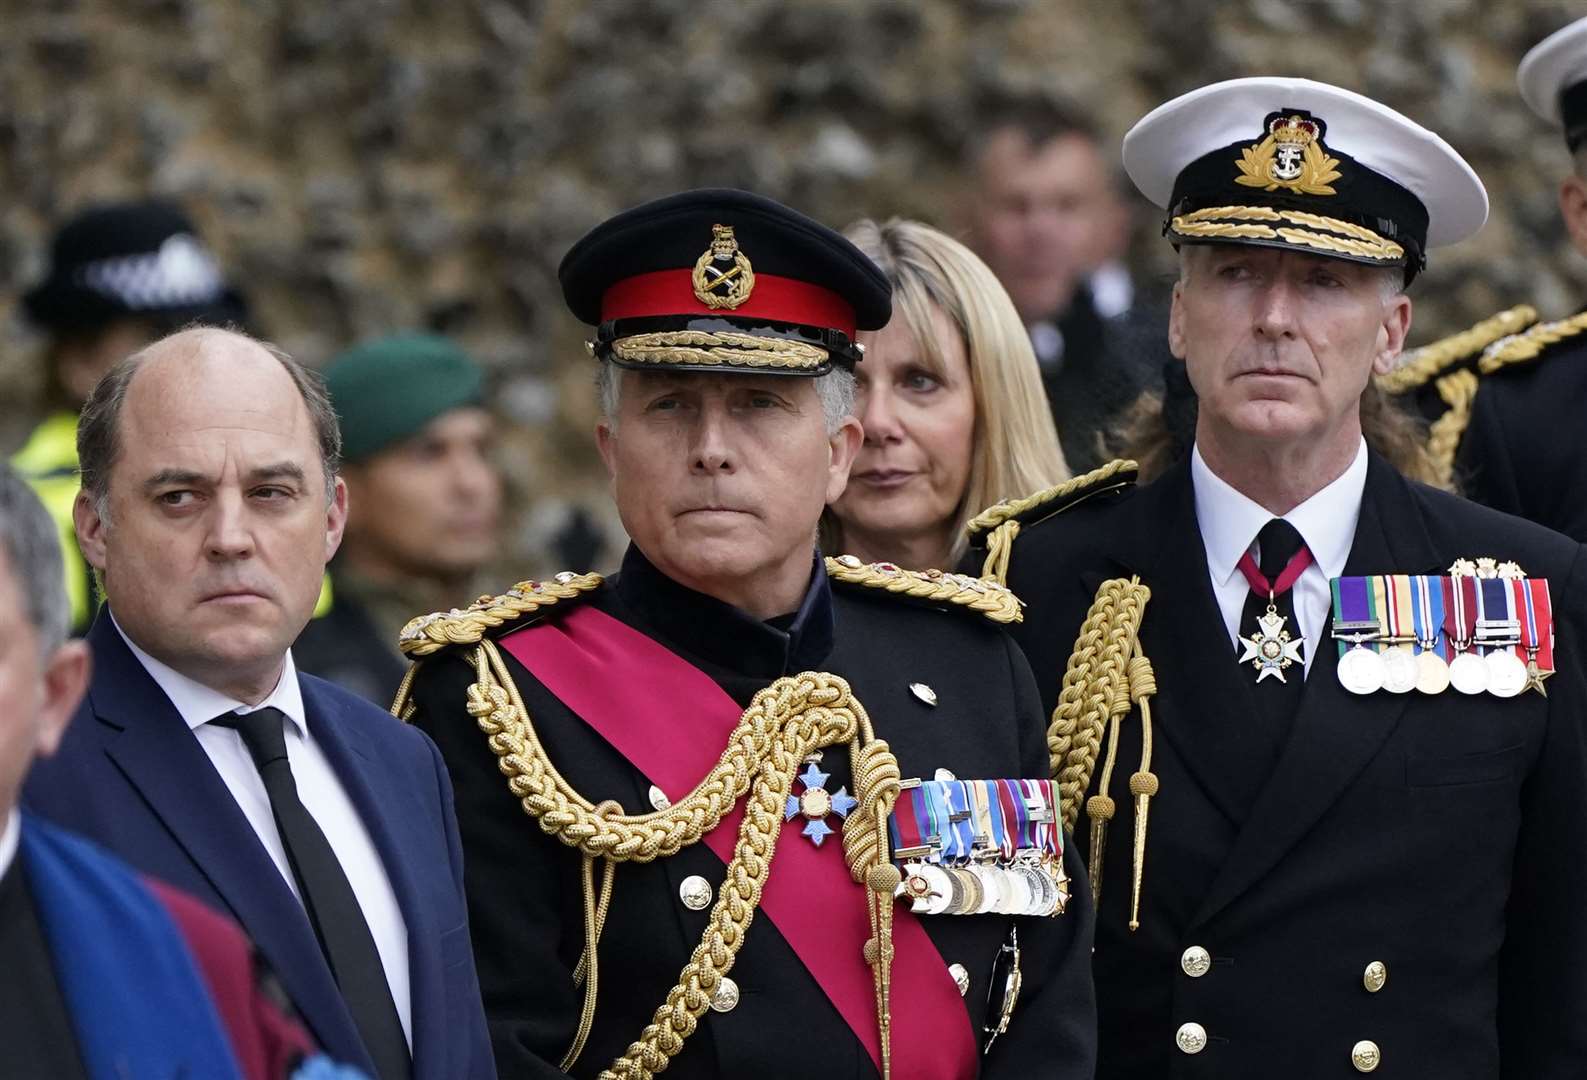 (L to R) Defence Secretary Ben Wallace, Chief of the Defence Staff General Sir Nick Carter and First Sea Lord and Chief of the Naval Staff Admiral Sir Tony Radakin attended the funeral (Andrew Matthews/PA)